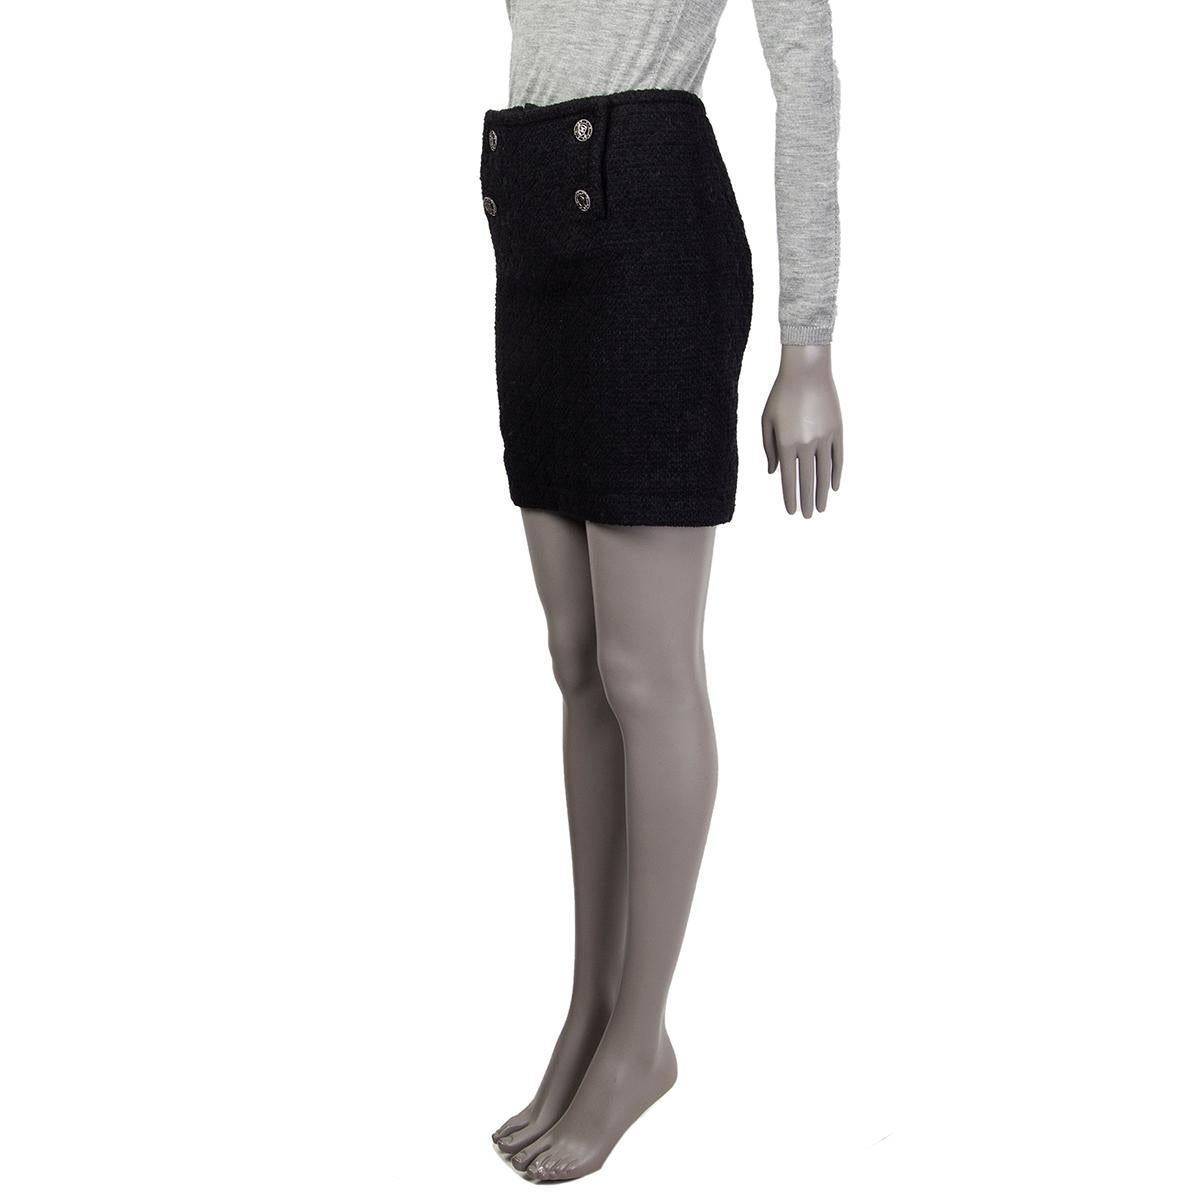 Chanel quilted-tweed double-breasted pencil skirt in black cotton (44%), nylon (40%), rayon (12%), and polyester (4%). With slit on the back. Closes with concealed zipper, hooks and snaps on the front, as well as CC crest buttons in black and silver